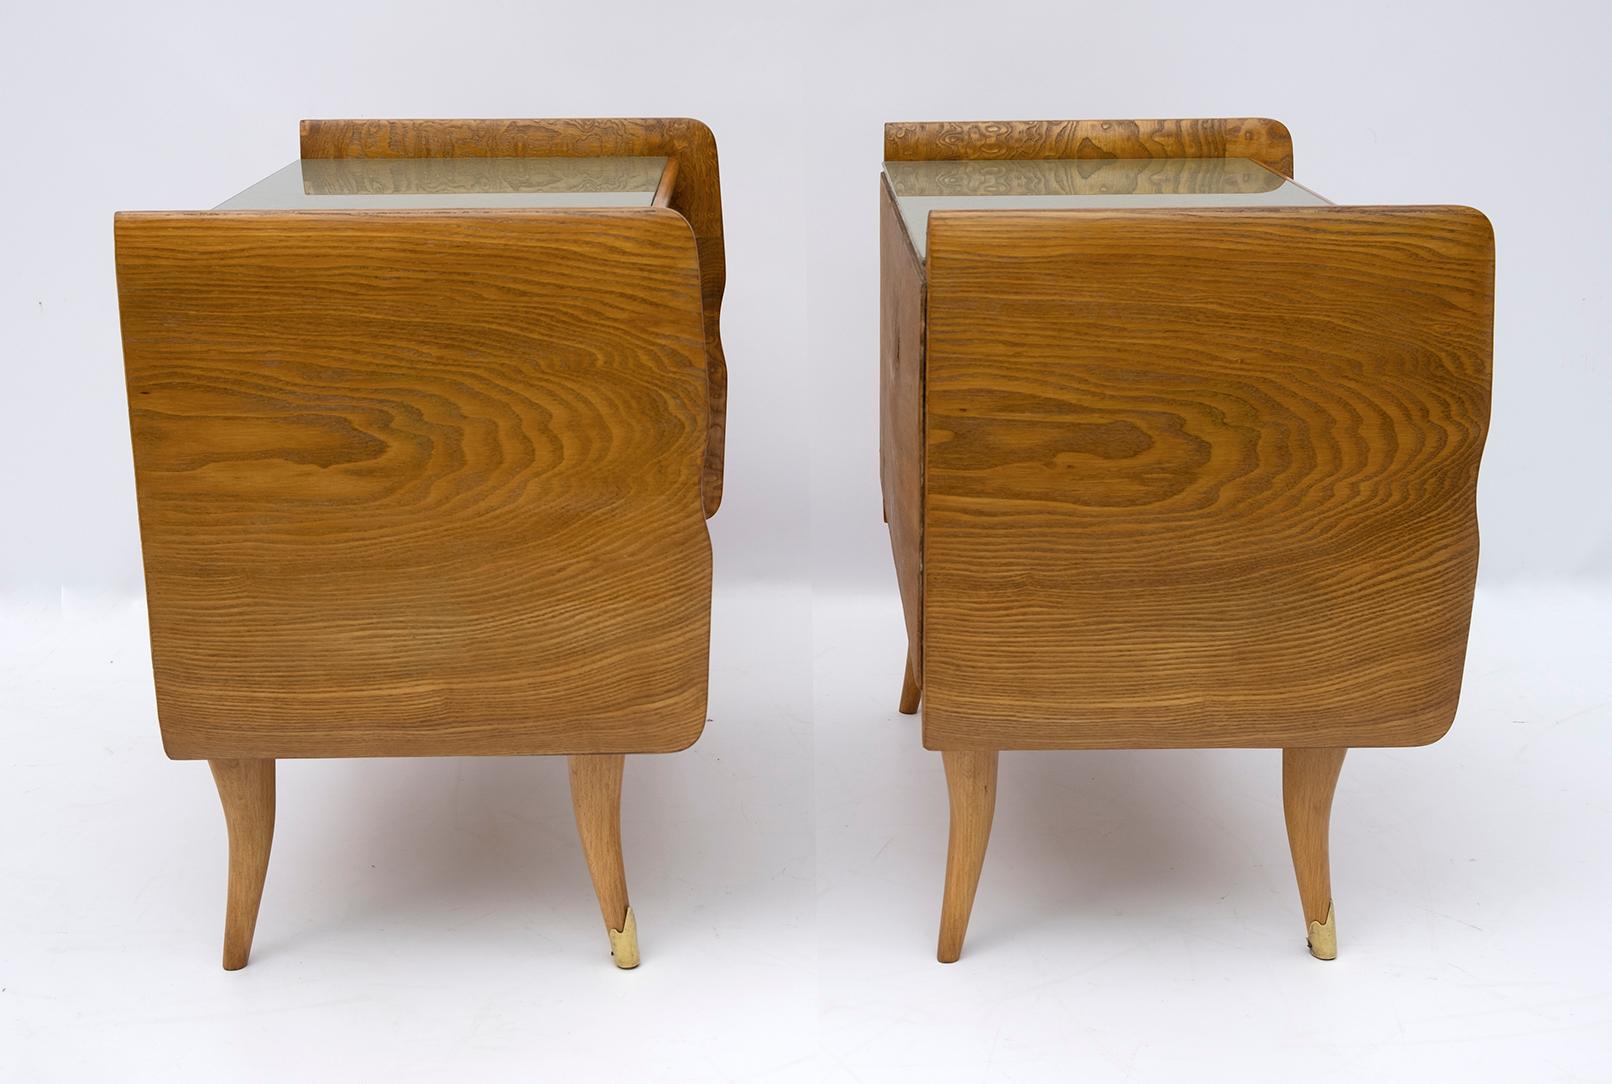 Brass Pair of Art Deco Italian Bedside Tables White Ash Briar, 1920s For Sale